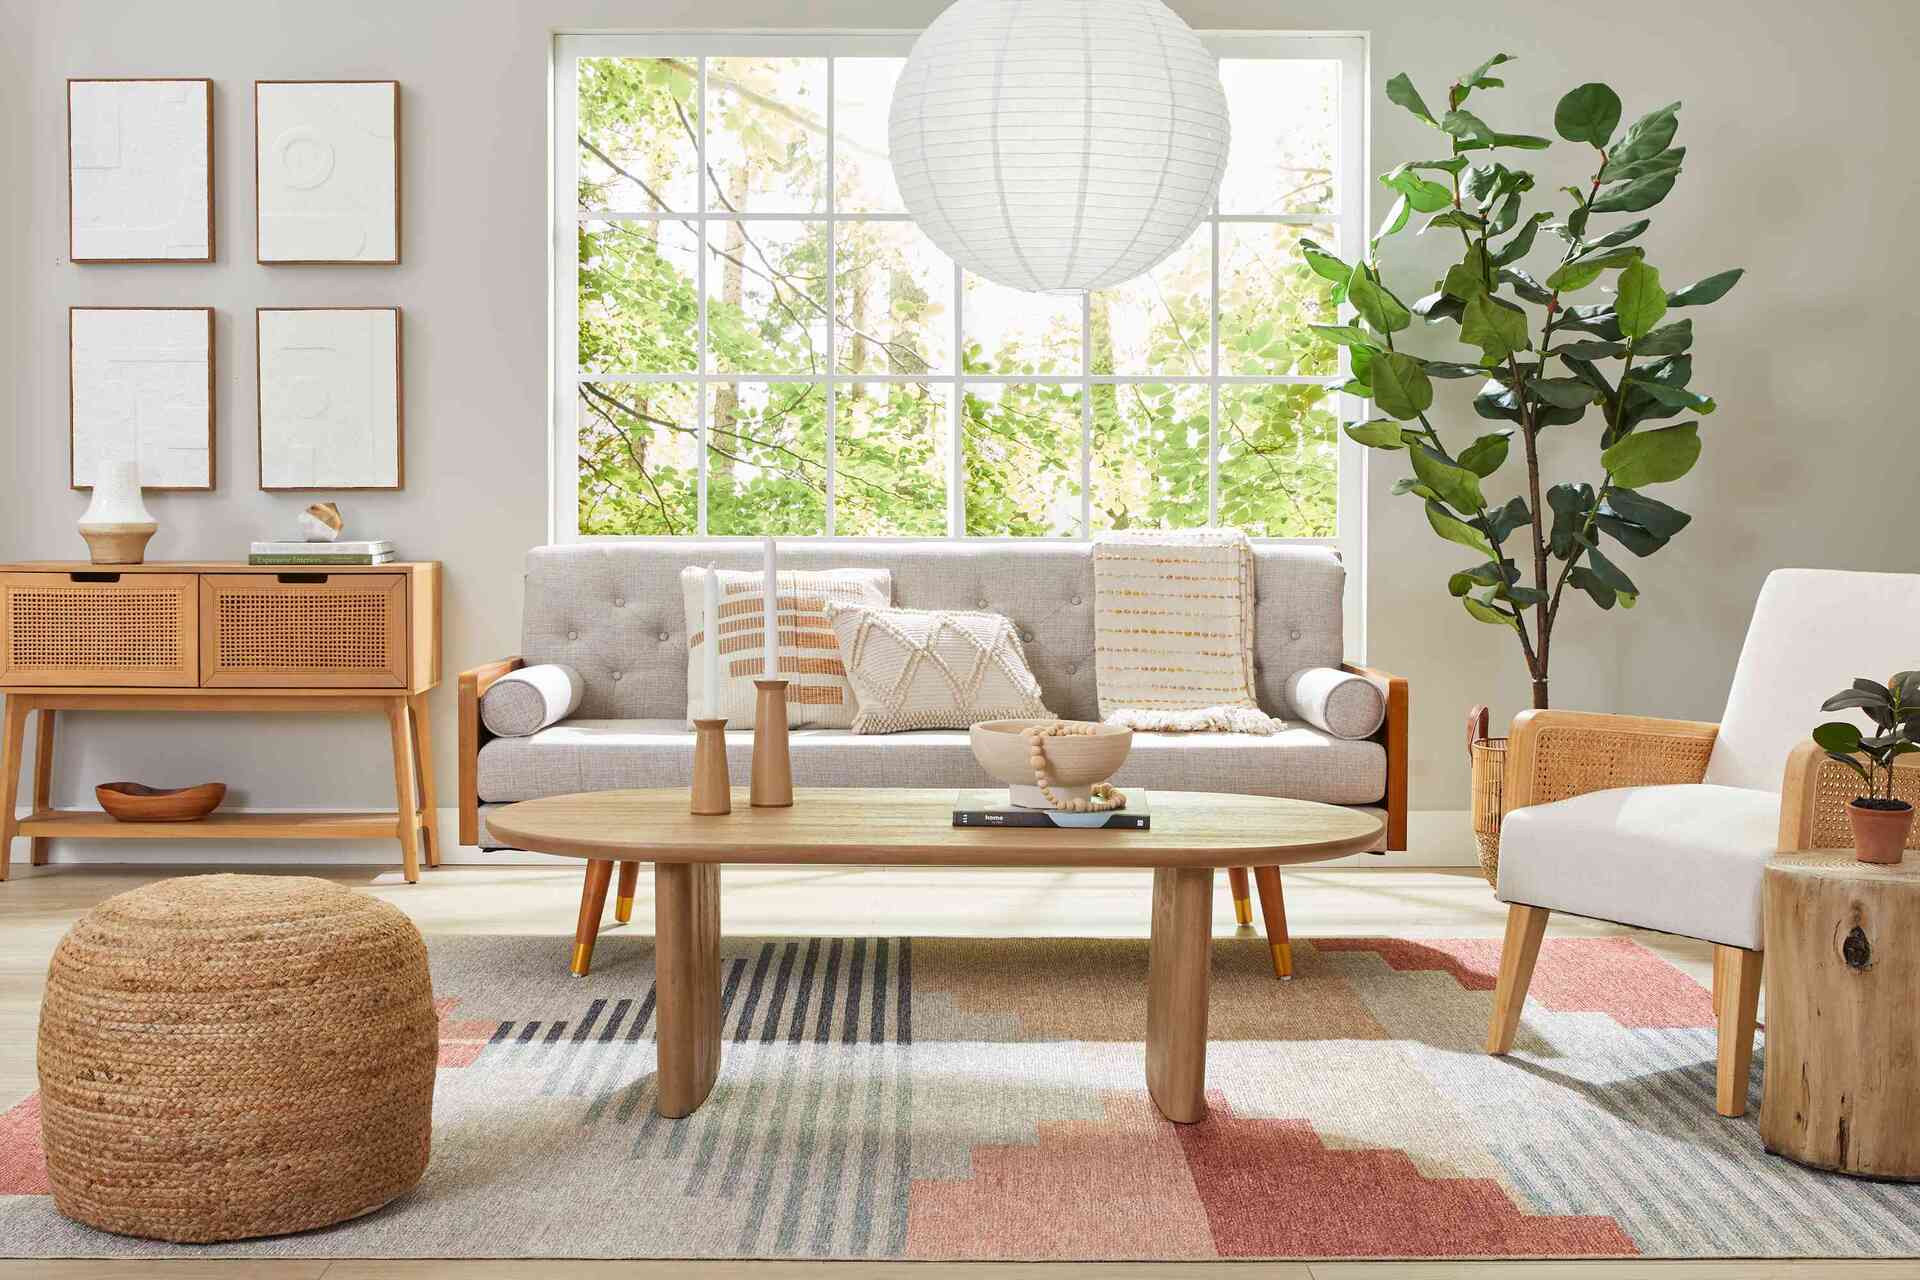 The New ‘pretty’ Decorating Trend For 2023, According To Experts